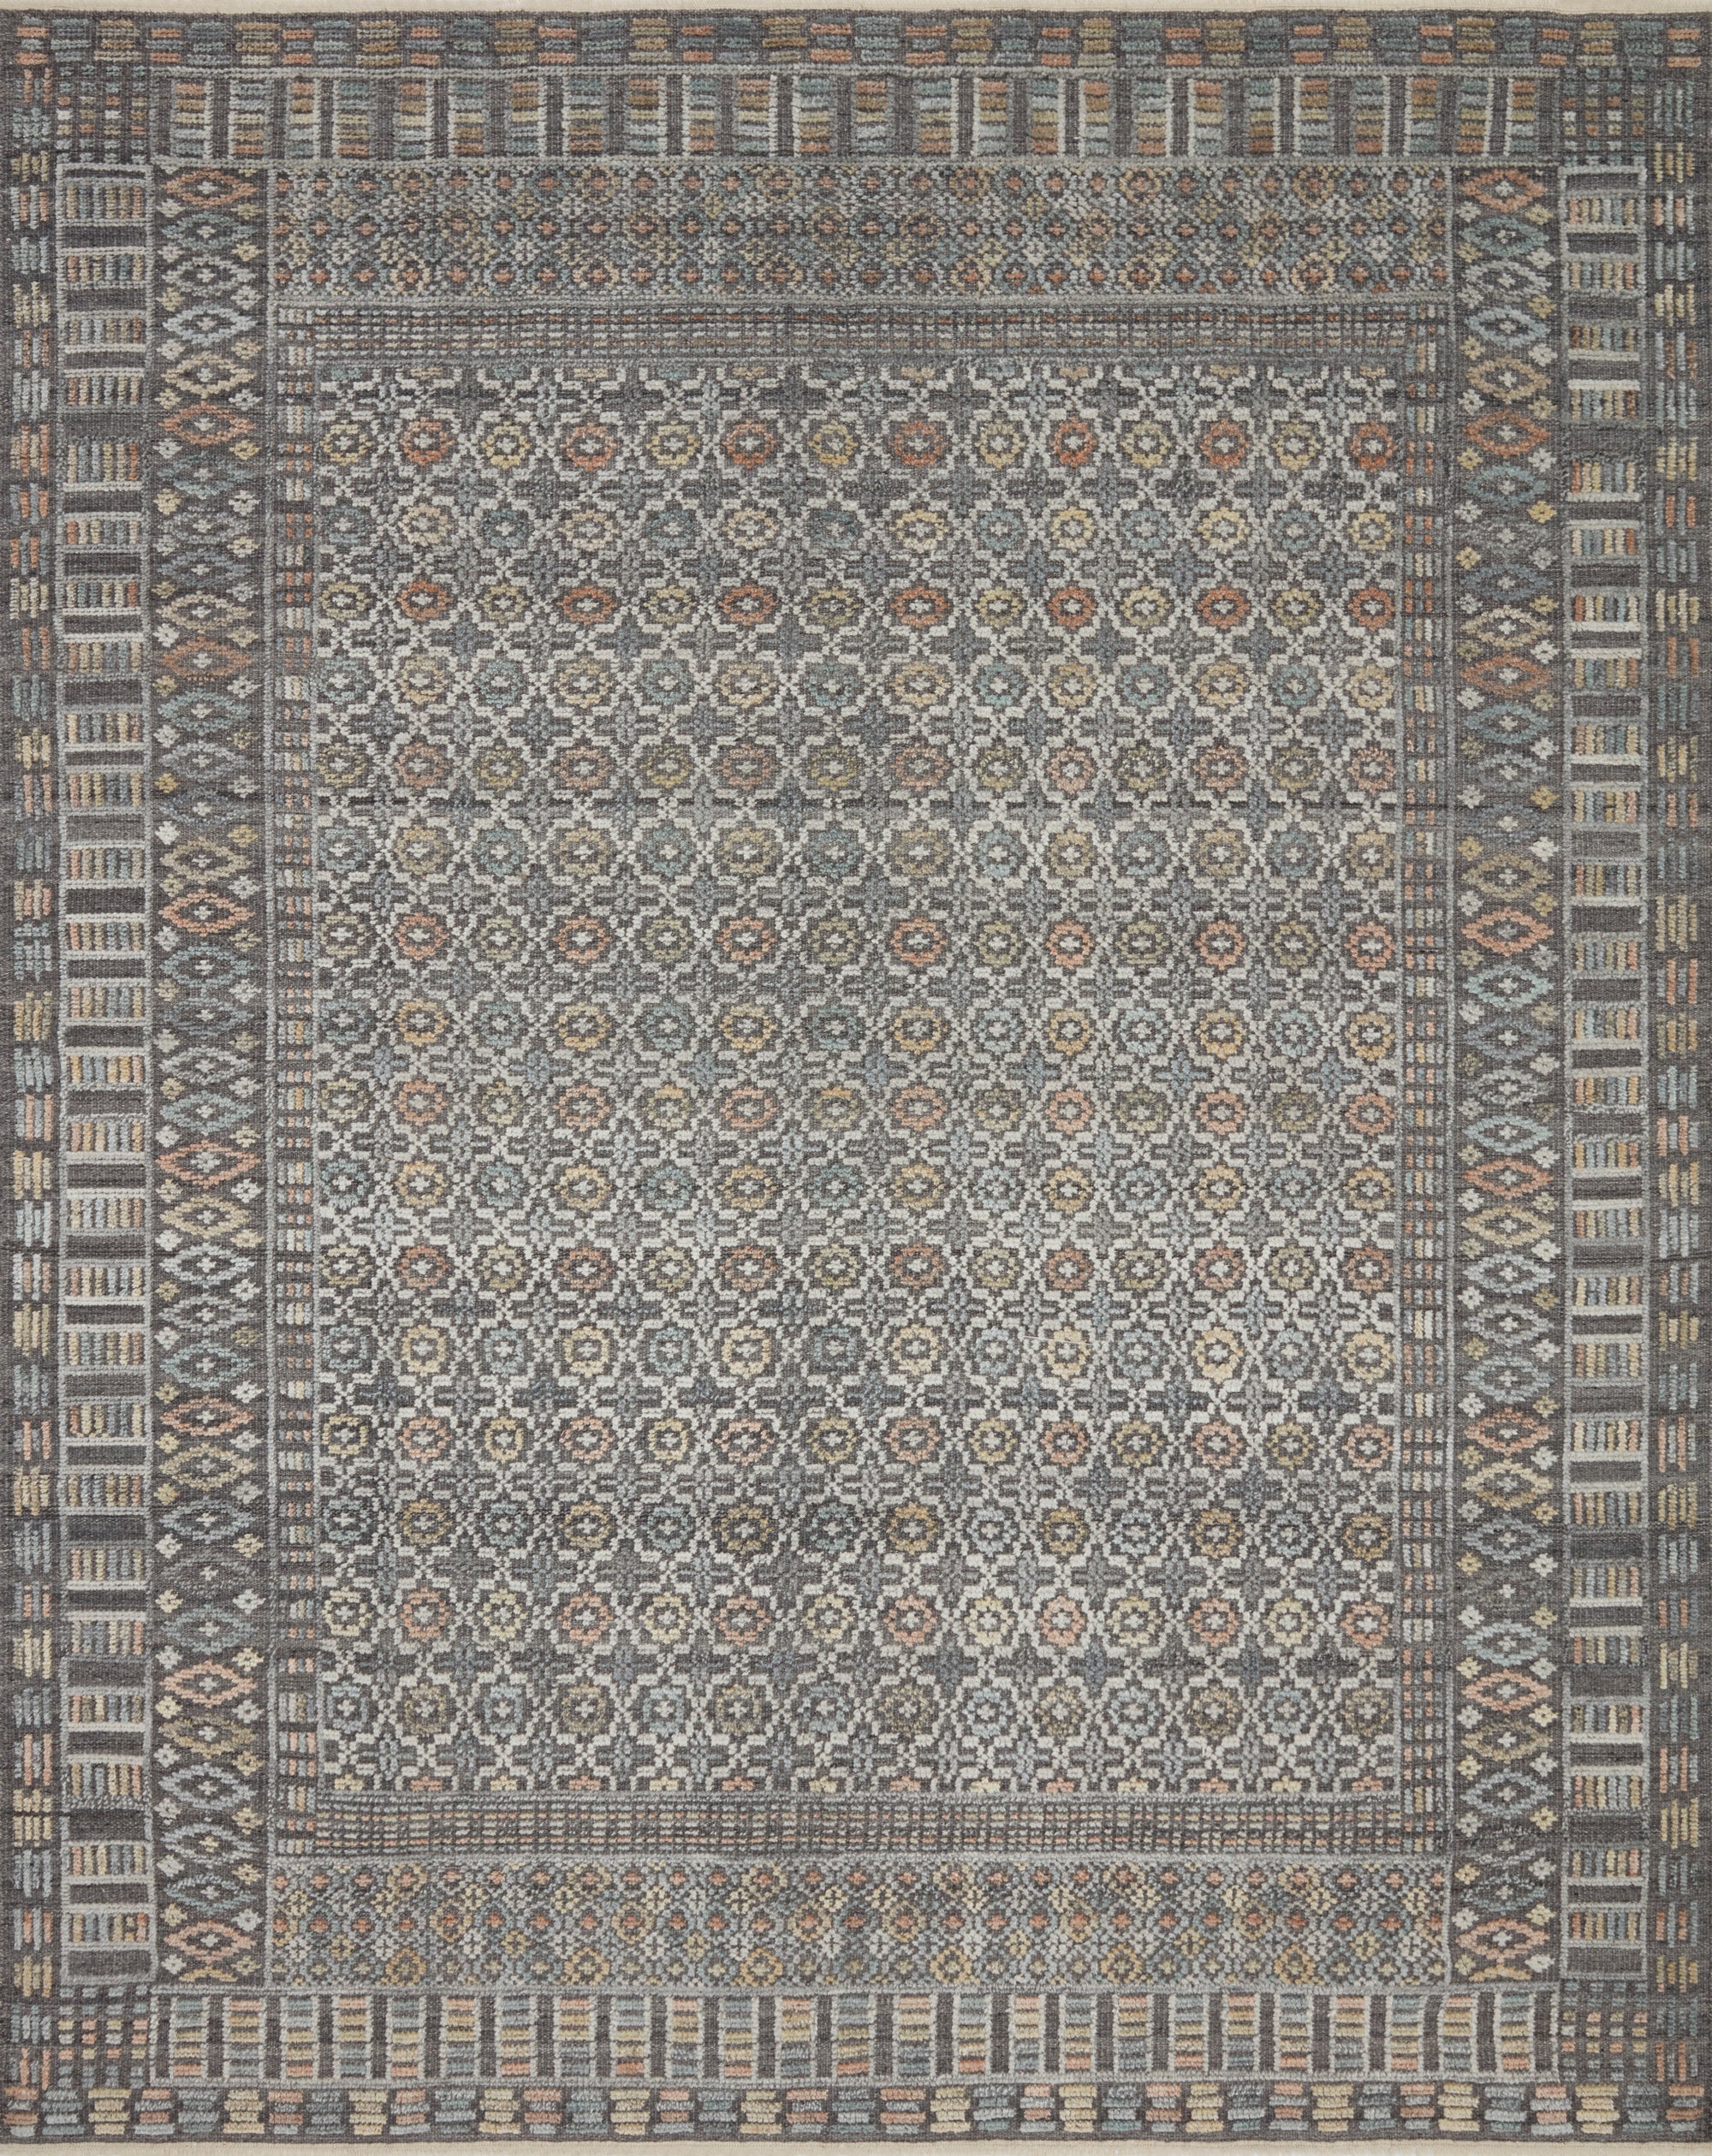 Nola IV Rug: Enhance Your Space with Style